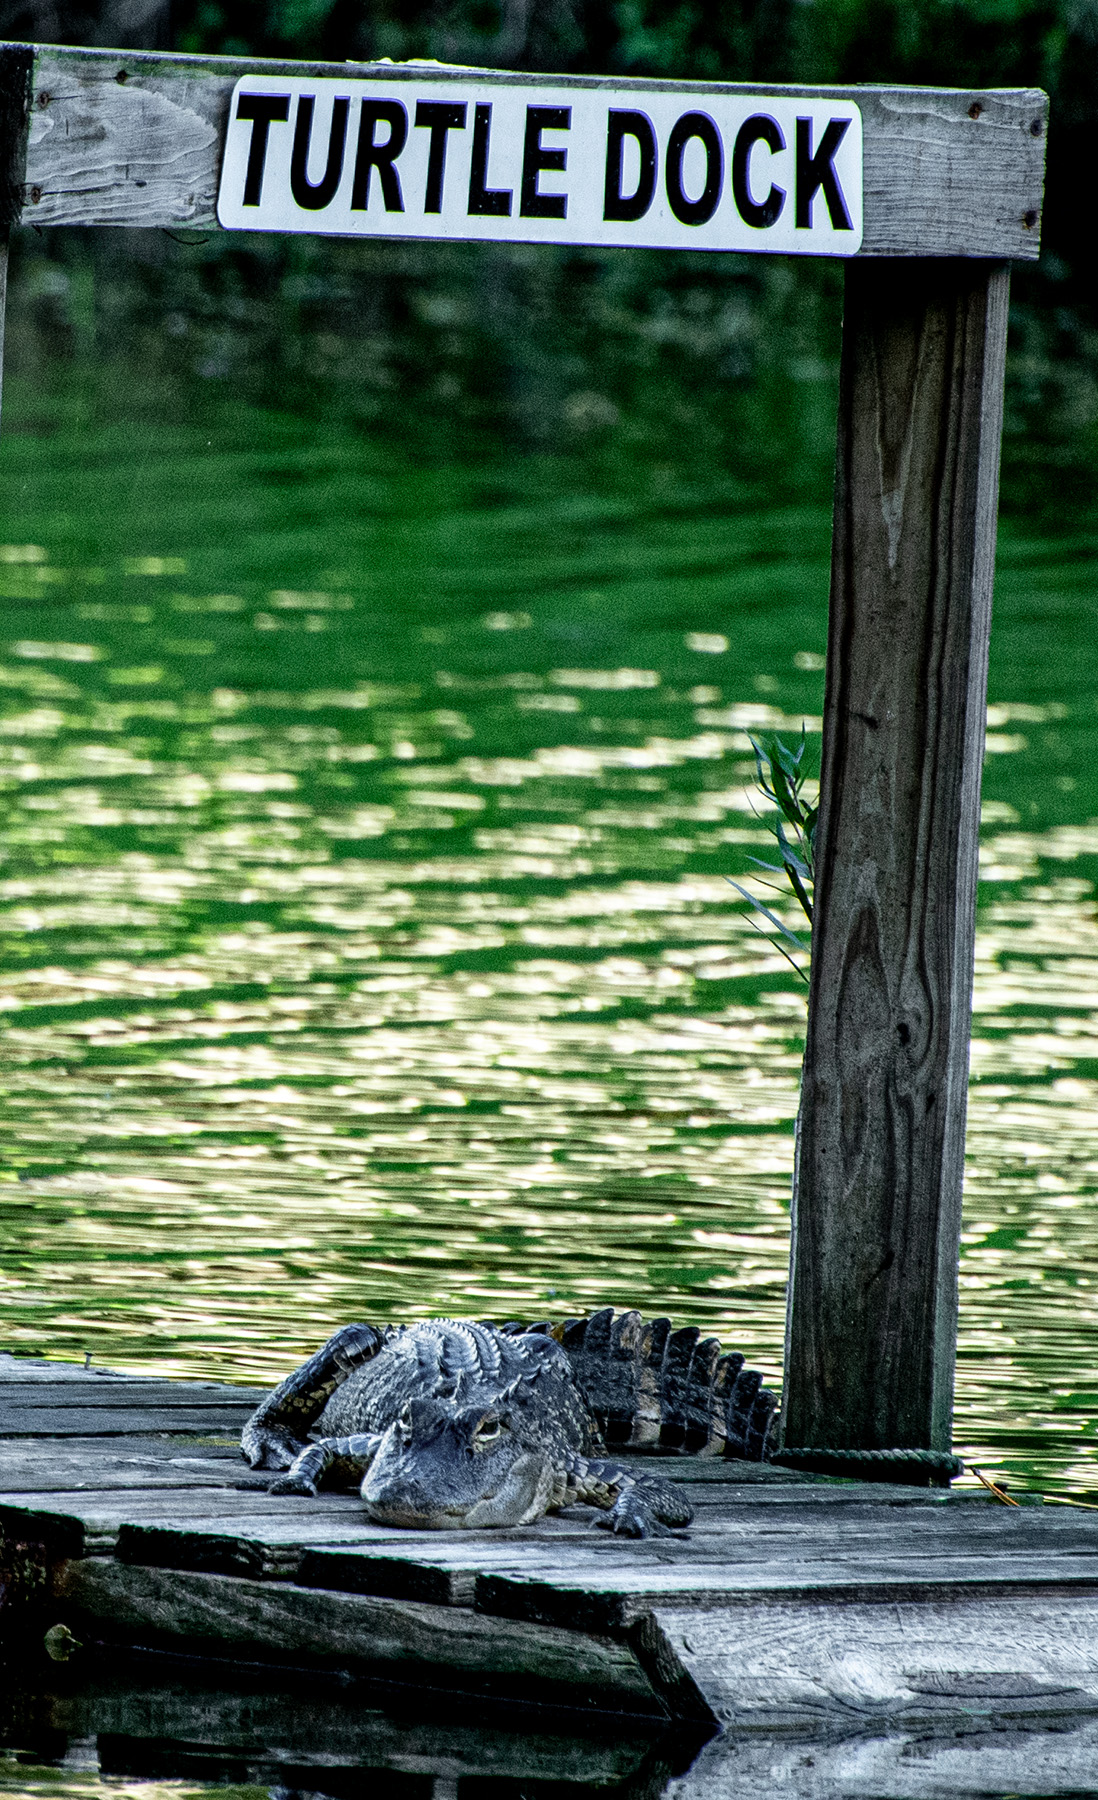 Too-Big-for-the-Turtle-Dock